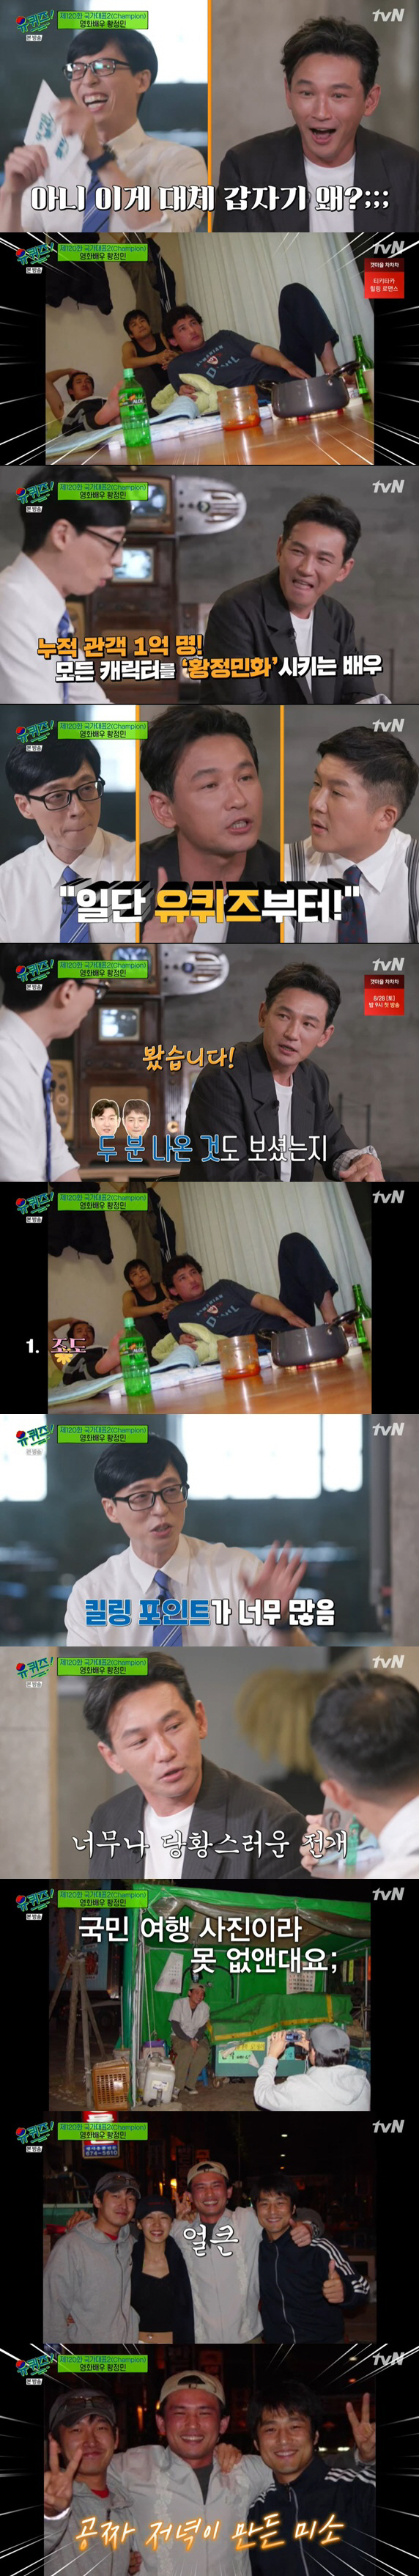 You Quiz on the Block Hwang Jung-min showed off his delightful dedication.Actor Hwang Jung-min appeared on TVN You Quiz on the Block broadcast on the 25th.Hwang Jung-min, the acting national representative who has 100 million cumulative audiences and all characters Hwang Jung-min, has been talking about the life story of Actor in the 28th year.Hwang Jung-min said, I watched Yu Quiz from the beginning.I am grateful for inviting me to my favorite pro, he said. I came to promote it anyway, but I told the public relations company that I would be the first to appear in You Quiz on the Block.The appearance of Hwang Jung-min will match the final puzzle of the friendship trip of Hwang Jung-min, Jo Seung-woo, Ji Jin-hee.Yoo Jae-Suk said, Thanks to your courage, all three captains appeared.I did not intend to, but it became my own big picture.  Did you see Ji Jin-hee and Jo Seung-woo? I saw it, said Hwang Jung-min, laughing. I was embarrassed because my friends came out. Besides, the picture continued to come out.This is really funny, said Yoo Jae-Suk, who saw the picture again.It is a trip of the steamers, he said, and Hwang Jung-min explained, I did not know it was really taking. Yoo Jae-Suk said, This photo is about the illumination of the room, the bottle of beverages placed in front of it, the kimchi pan and the pot that I ate next to it. Hwang Jung-min said, Lets eat the first and then boil it and add a drink to it.Jo Seung-woo and Ji Jin-hee did not eat, so I did a trick. Then, when Yoo Jae-Suk asked, What was it like when the pictures were walking around in a row? Hwang Jung-min said, I was so embarrassed, I thought it was crazy. No, what is this all of a sudden?I thought, why did people follow this and why did not I understand it?Hwang Jung-min said, Since Ji Jin-hee appeared on You Quiz on the Block, why do not people come to You Quiz on the Block?I asked him, he said, what would you have done if you did not travel?The travel expenses were shared at the time, but the most popular Ji Jin-hee paid a little more; Hwang Jung-min said of Ji Jin-hee, I still do not know.When I know, I have a side that I want to know what is she? Also released was a photo taken with Actor Jeon Do-yeon on the day, with Hwang Jung-min saying, I had dinner with Jeon Do-yeon because of the timing.Jeon Do-yeon bought rice and laughed brightly. If you go on a second trip with Hwang, Jo, Ji, where would you go? I want to go anywhere near.But can I play with a little joke like that? I think that everyone is famous and I can play comfortably.On the same day, Hwang Jung-min gave a heartfelt affection and affection for acting, such as the background of having Actors dream, an anecdote that set up a theater during high school, the story of the first cast in the movie, and the detailed character analysis method that made the current national representative class Actor Hwang Jung-min.In particular, Hwang Jung-min caught the eye by telling the story of a 20 million won debt after setting up a theater company during high school days. At that time, passion and passion remained.I gave up my academic exams without my parents knowing, and I prepared for the performance, but I was smashed. Who would come to see high school students do it? Hwang Jung-min appeared in the film The Generals Son to pay off the debt; he said, I passed after the third audition, but I did too much NG.Finally, Hwang Jung-min said, I seem to be growing steadily. When I was young, I wanted to play a role well and I was self-defeating.I let myself go more because I wanted to be in trouble.I am a little bit acknowledging me and now I am acting while enjoying it.  I want to be an actor who wants to see the work and just be expected by the name Hwang Jung-min. 